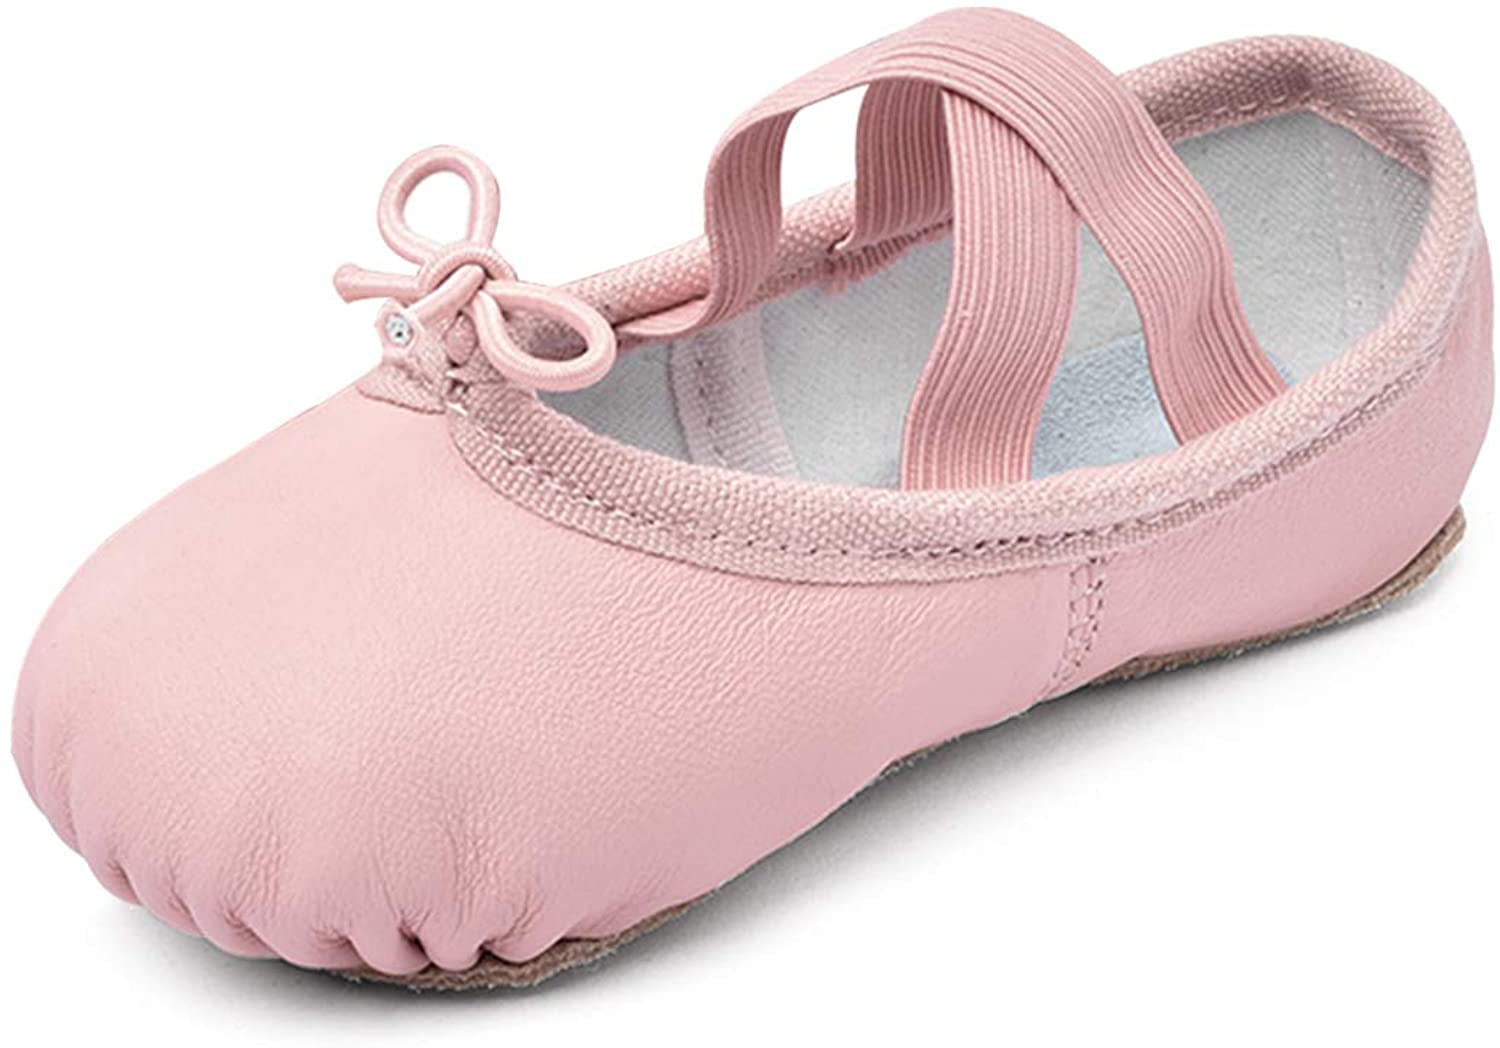 kids leather ballet shoes